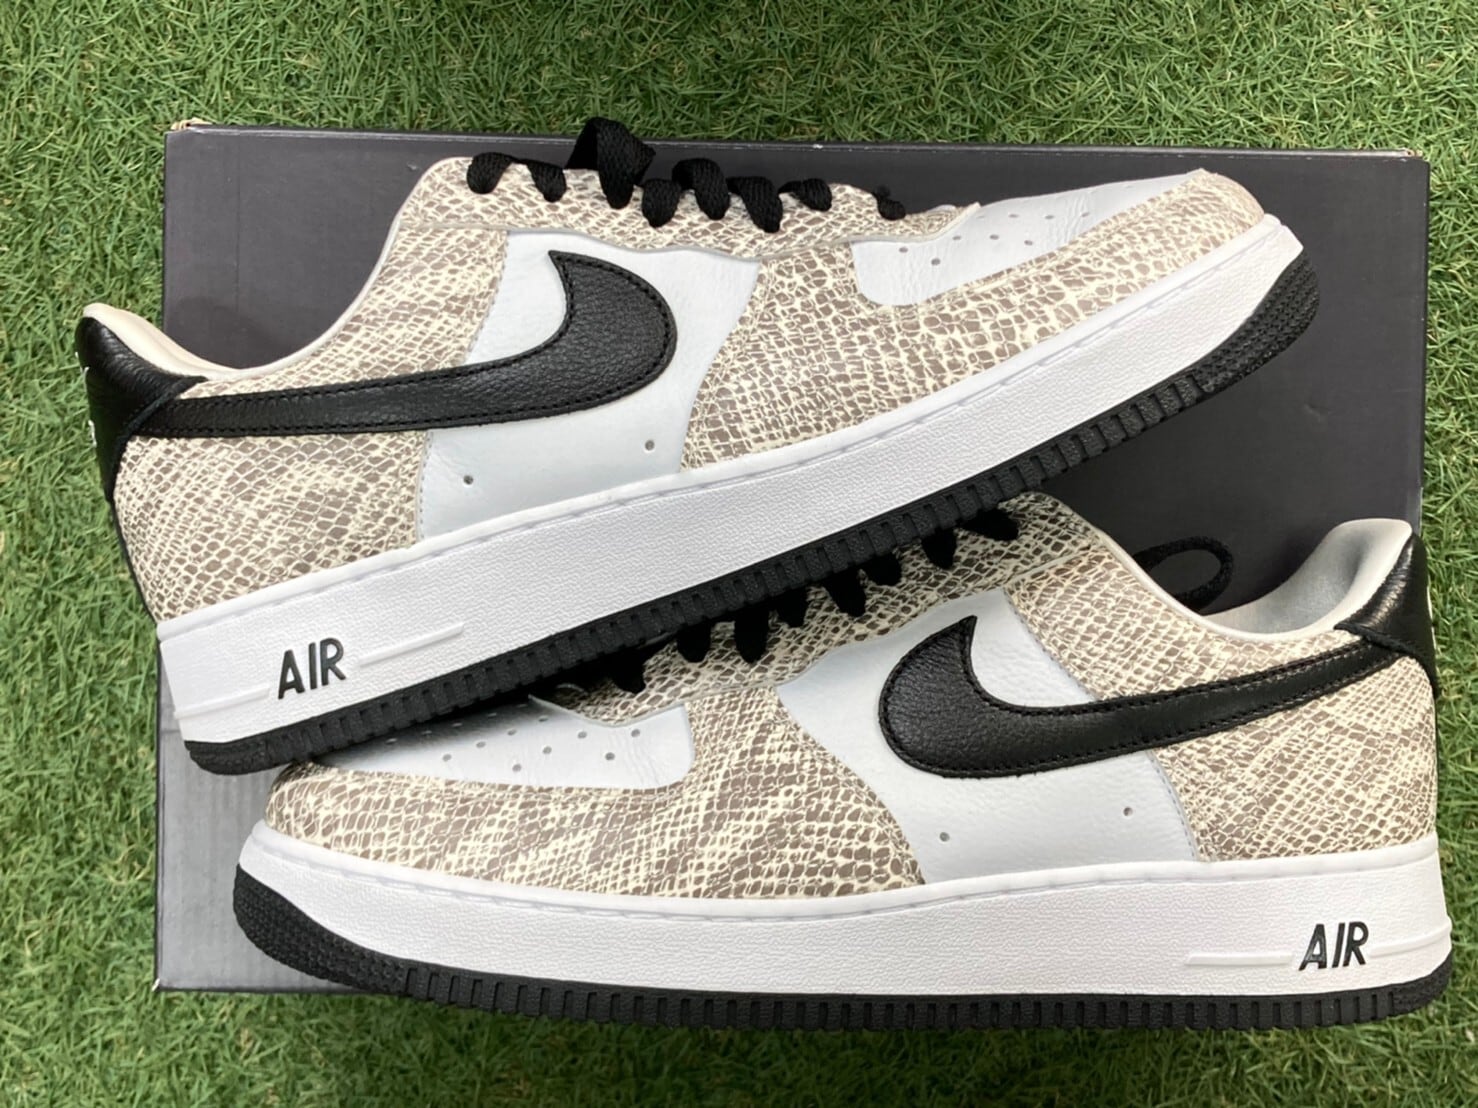 NIKE AIR FORCE 1 LOW COCOA SNAKE 28cm